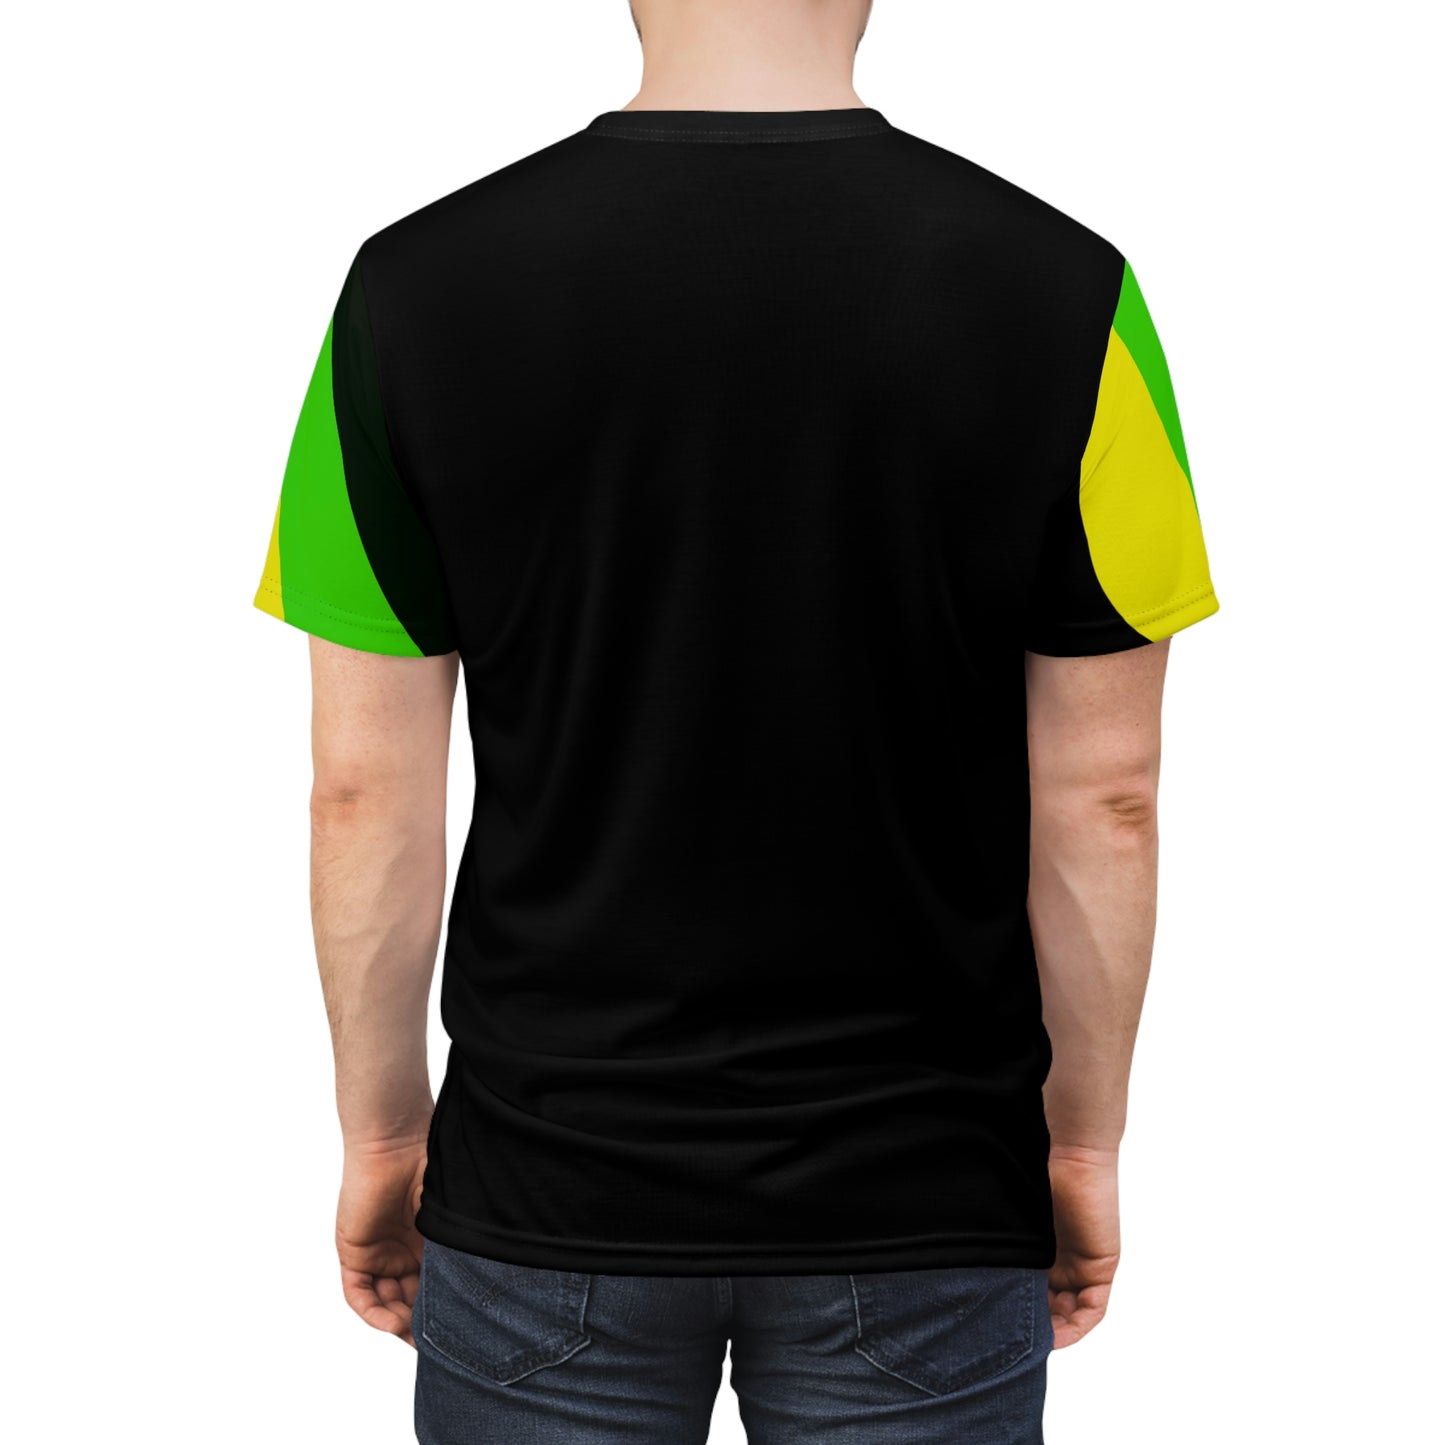 Black and yellow Jamaican style T-shirt